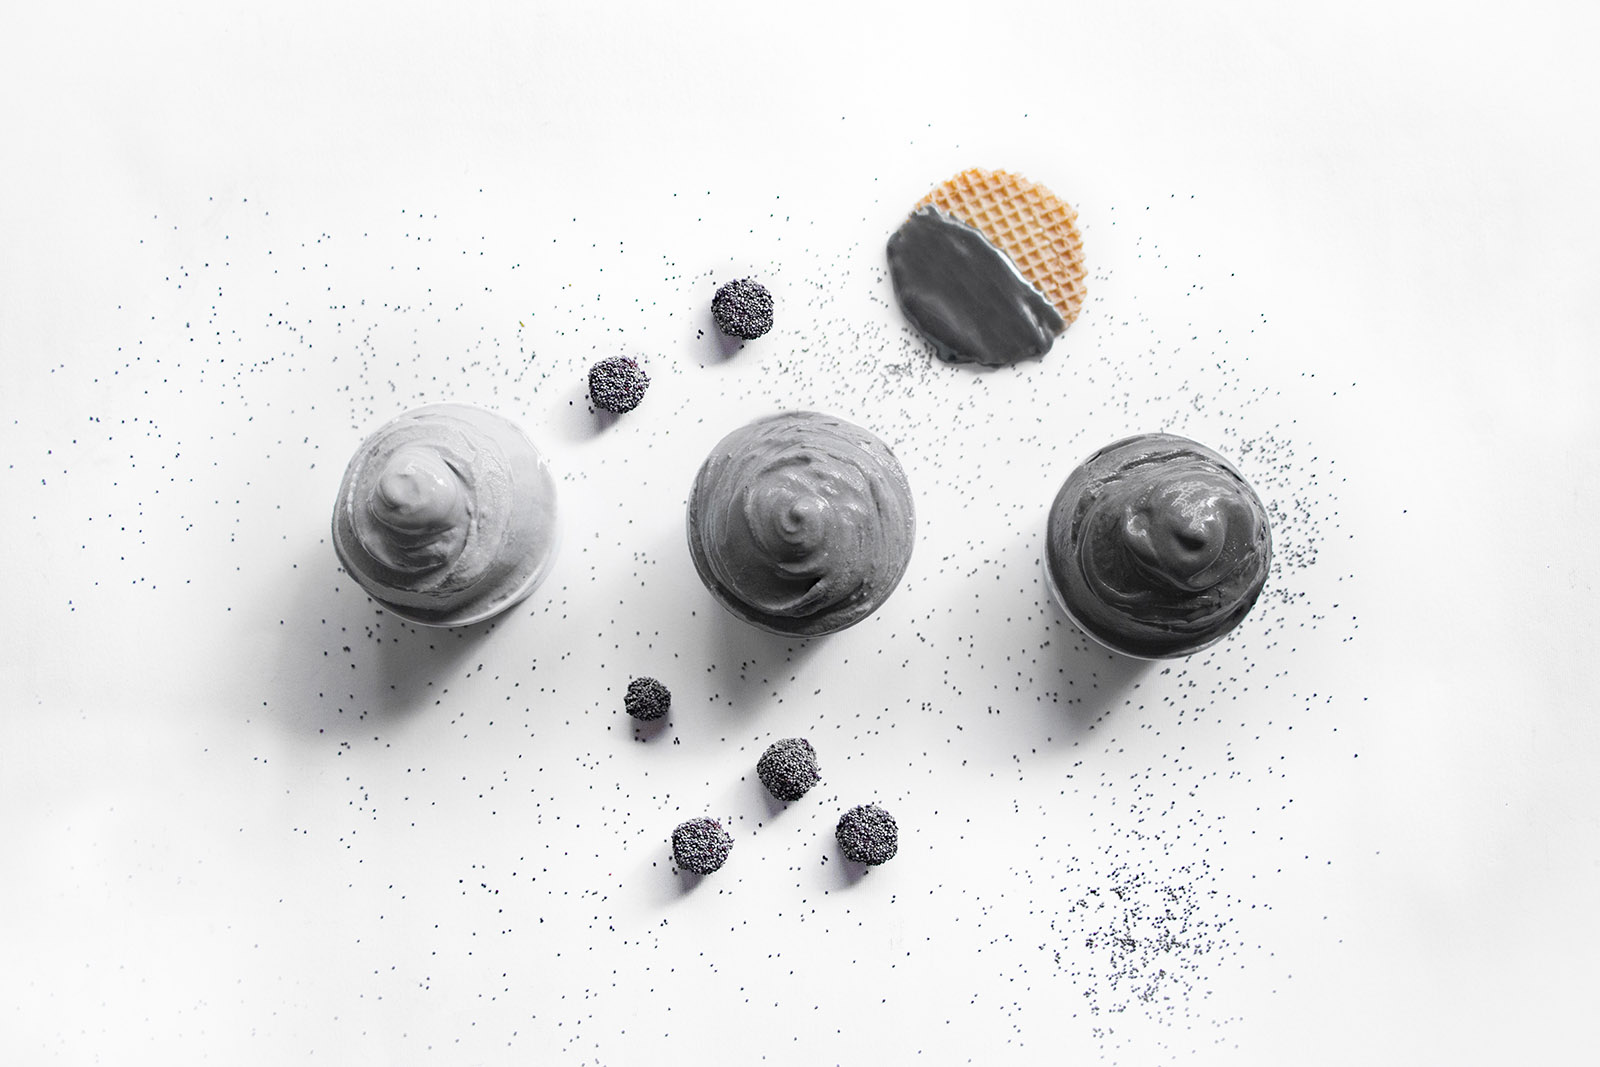 Here is the gray ice cream that pays tribute to Giorgio Armani's fashion